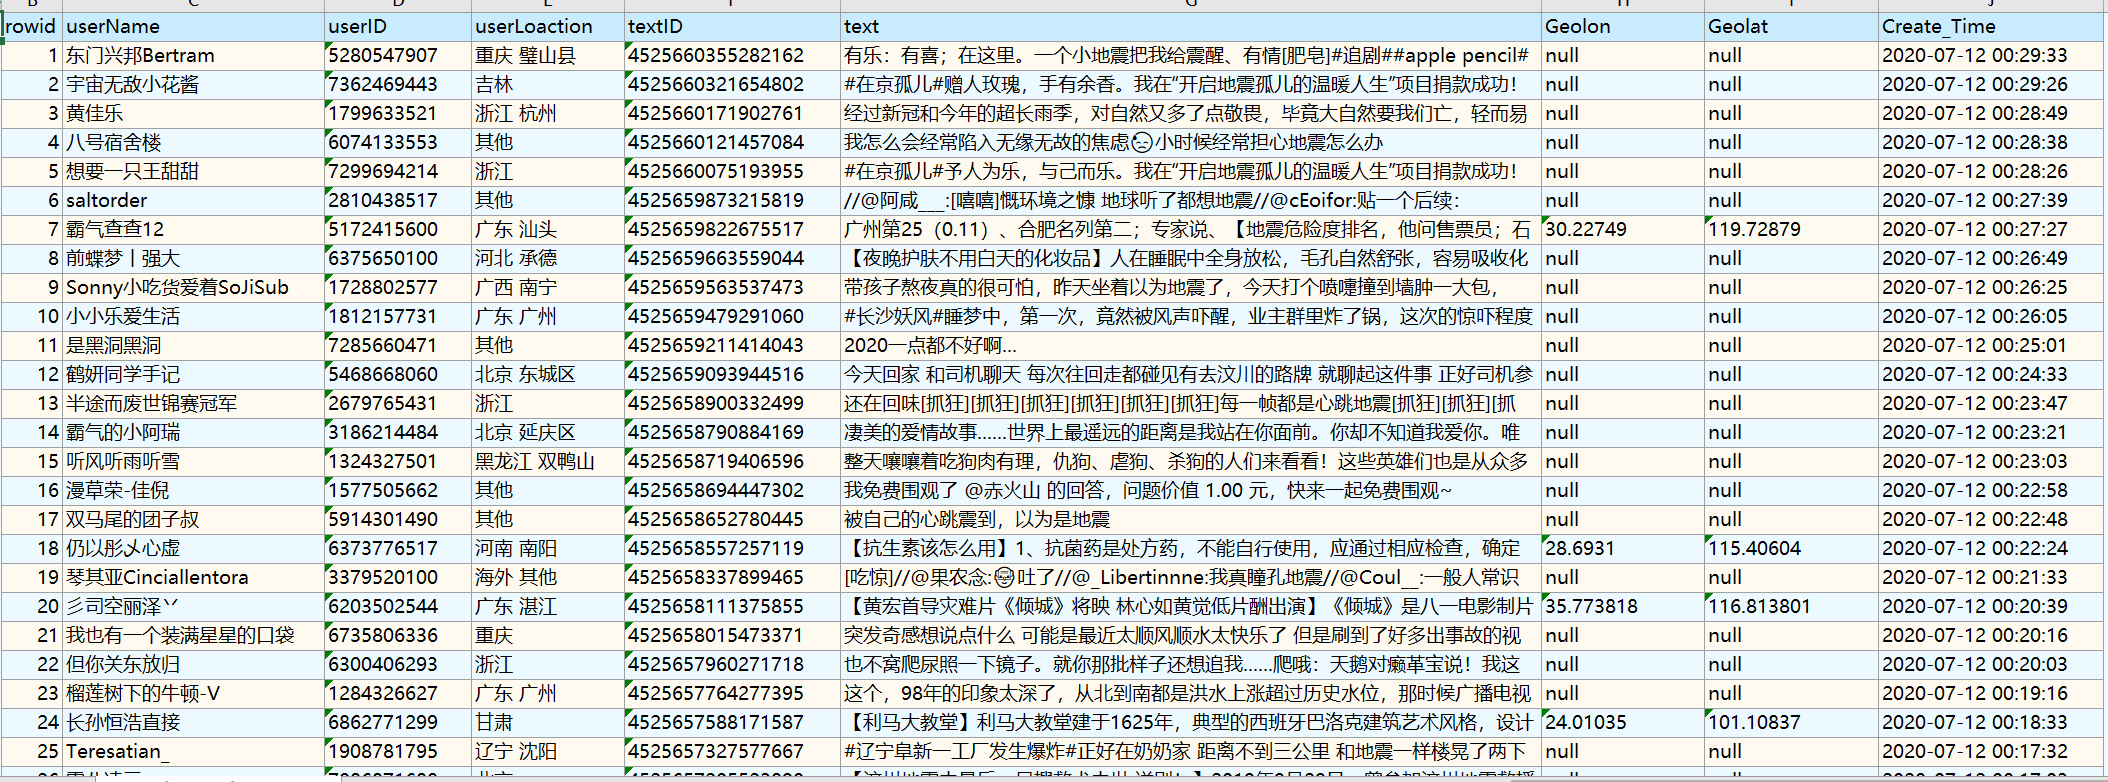 Weibo DataSet related to the Earthquake in Tangshan, China (2020)